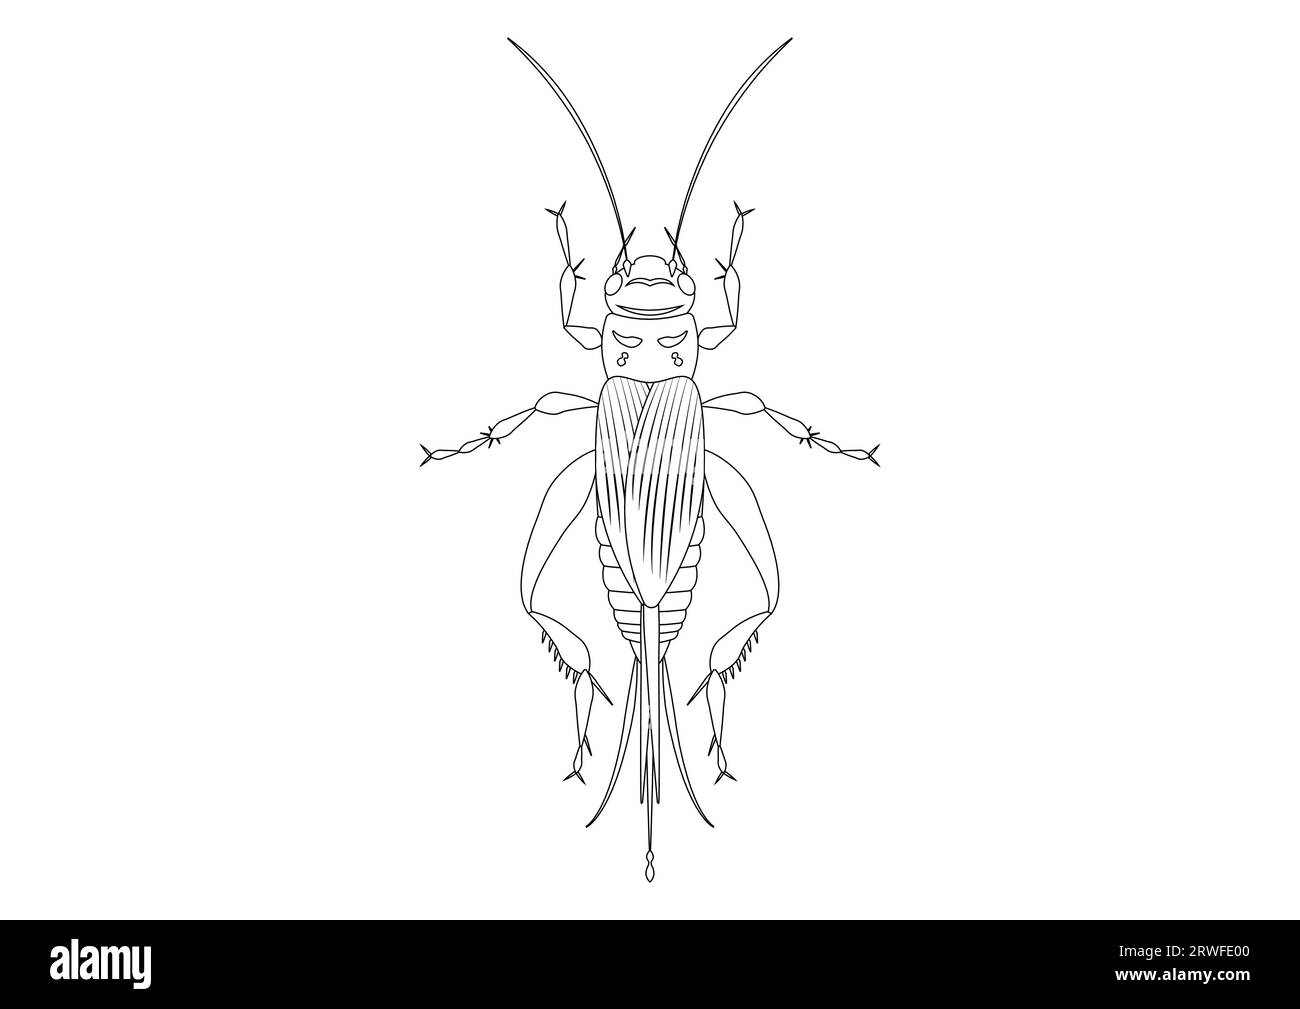 Black and White House Cricket Clipart. Coloring Page of House Cricket Illustrazione Vettoriale